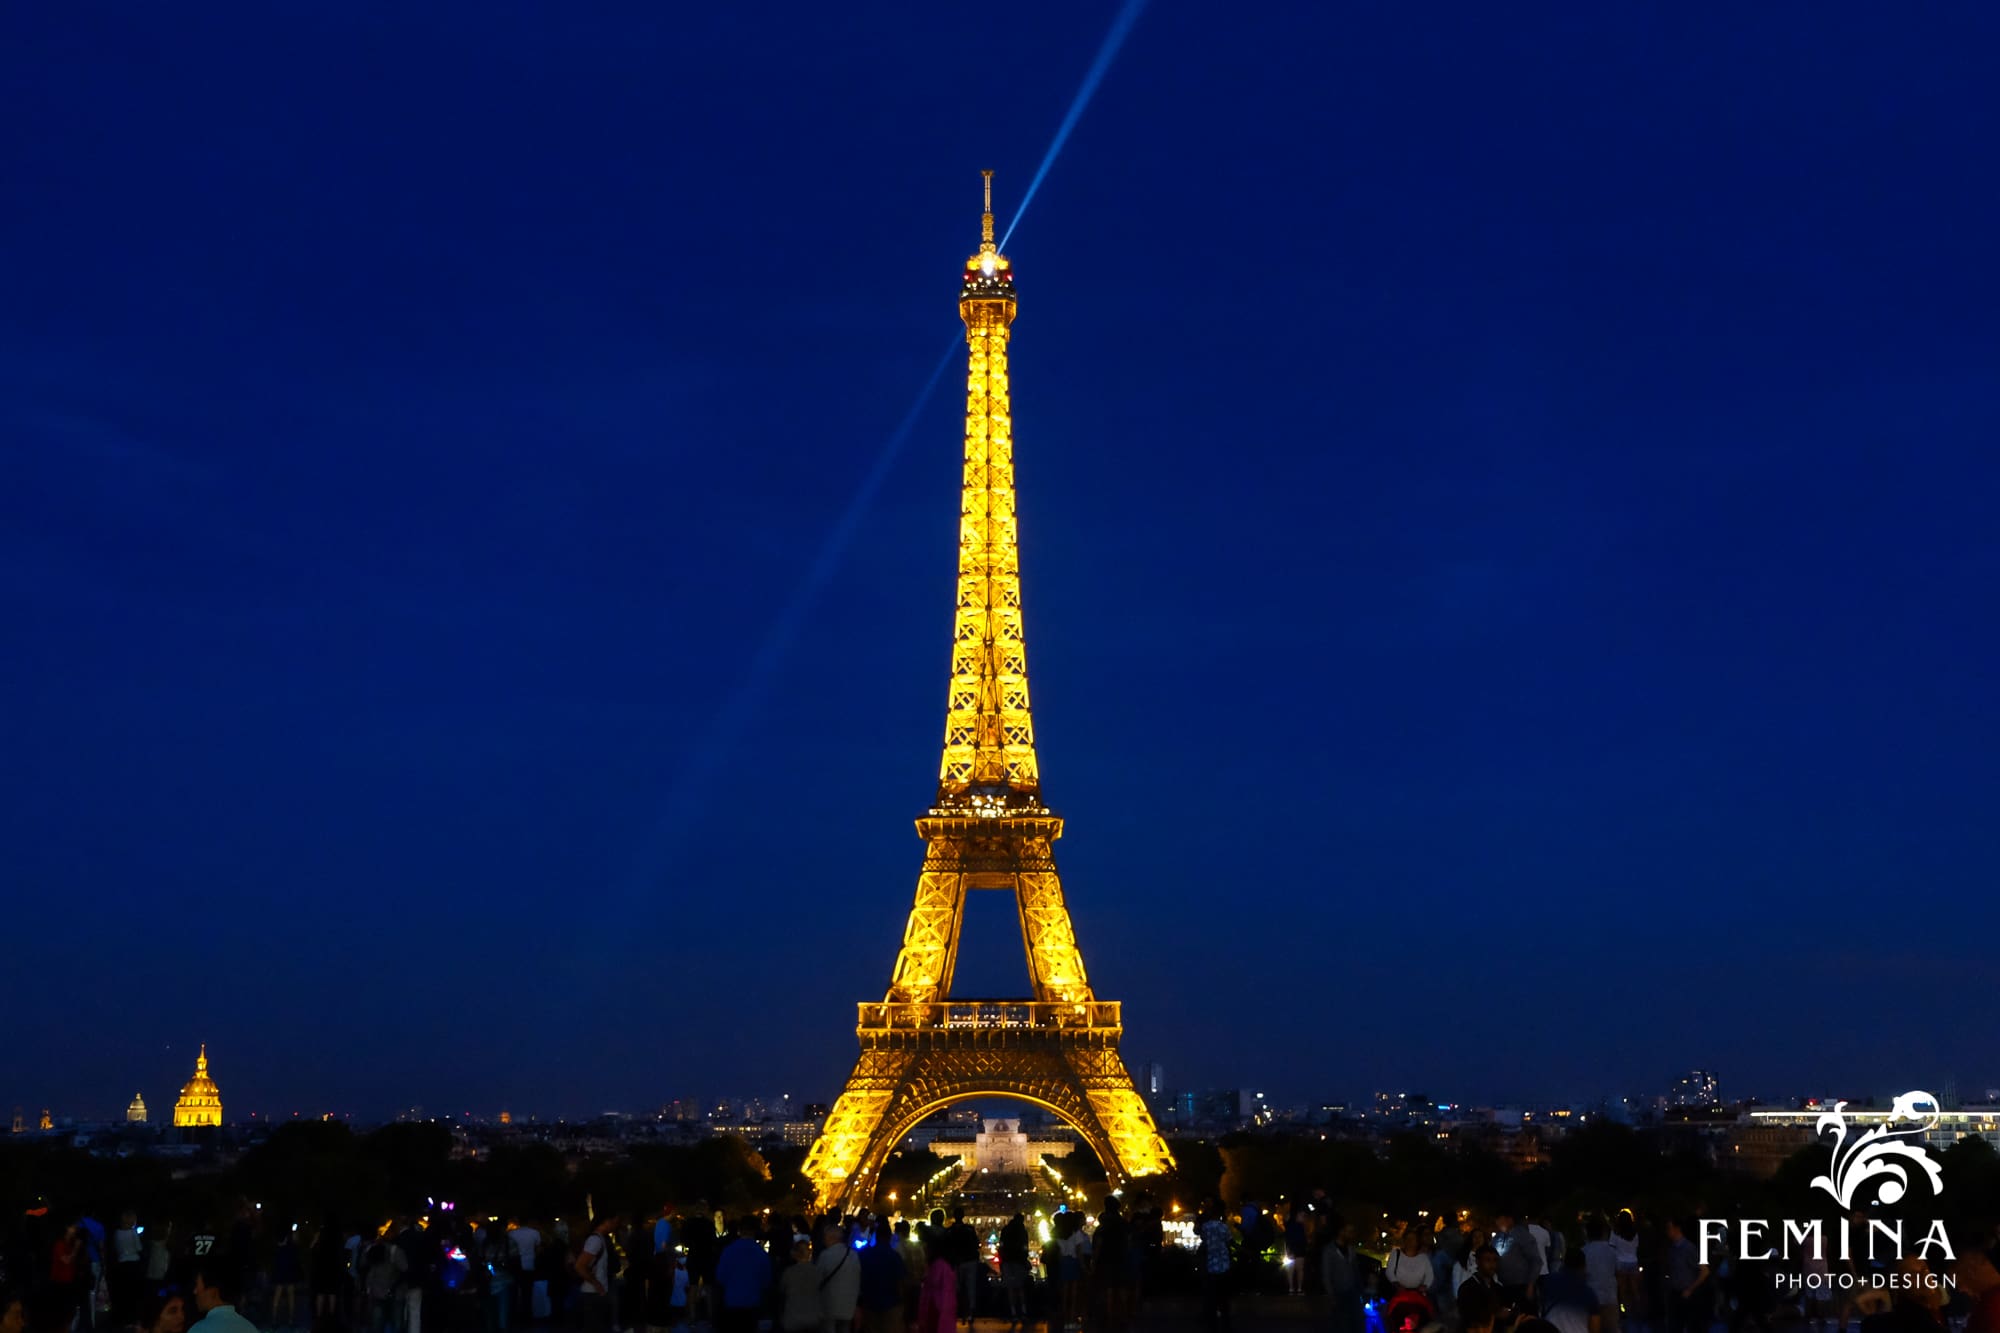 Eiffel Tower photographed at night with light beams